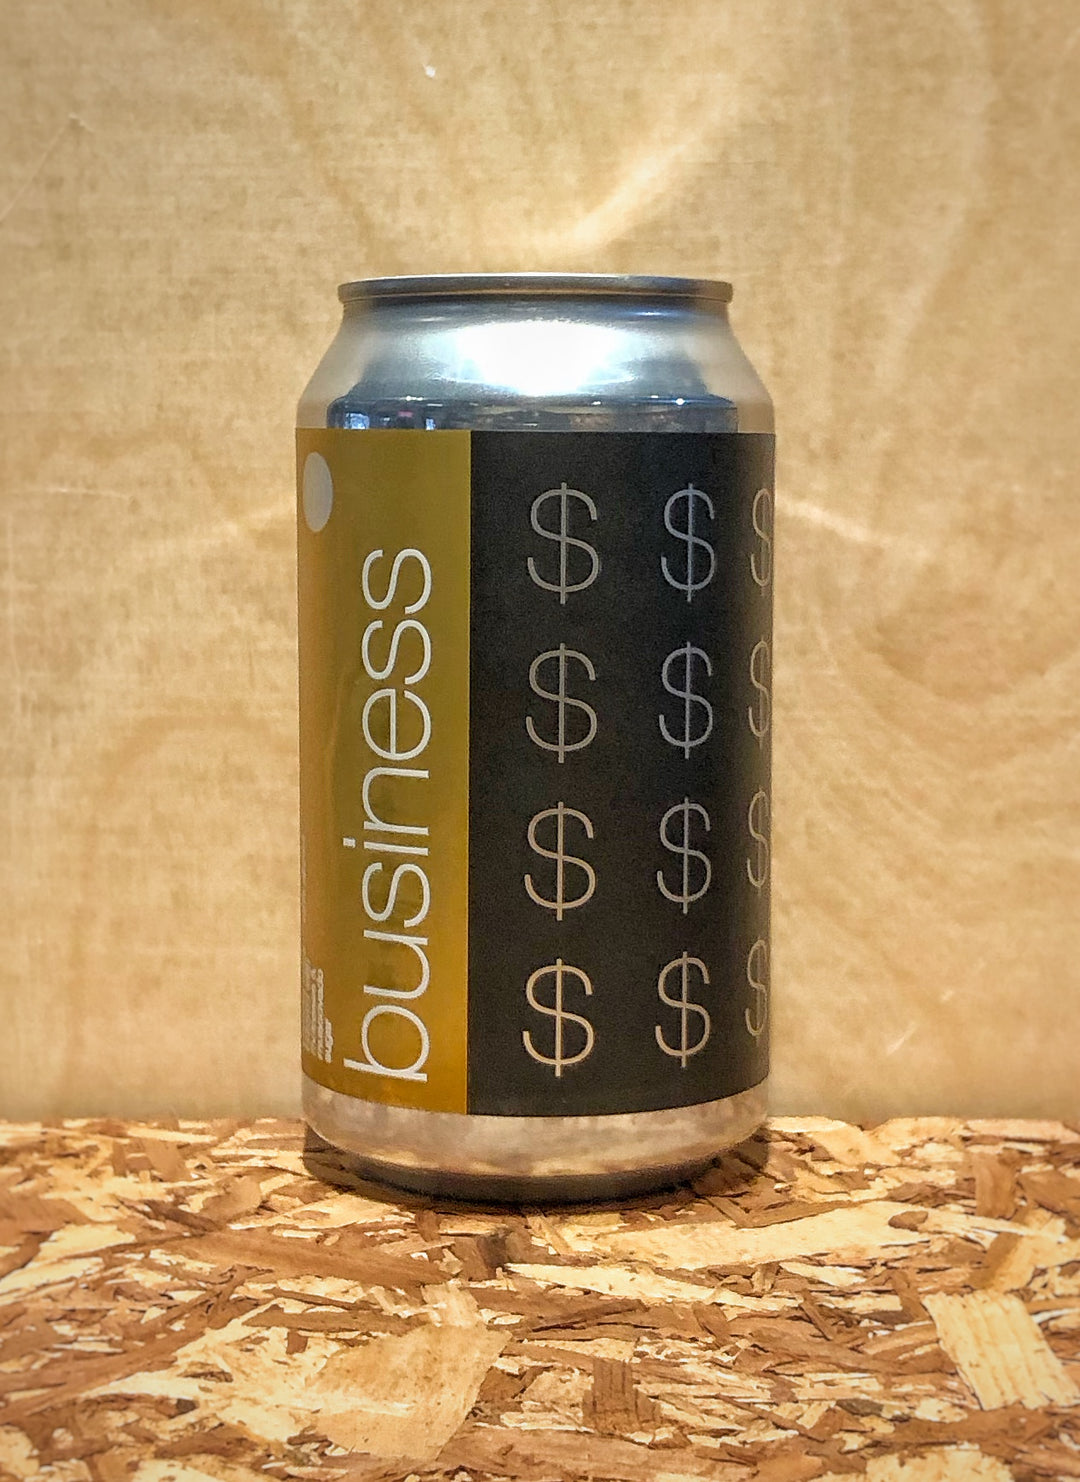 Stillwater 'Business' Imperial Stout brewed with Molasses & Muscovado Sugar (Grand Mound, WA)